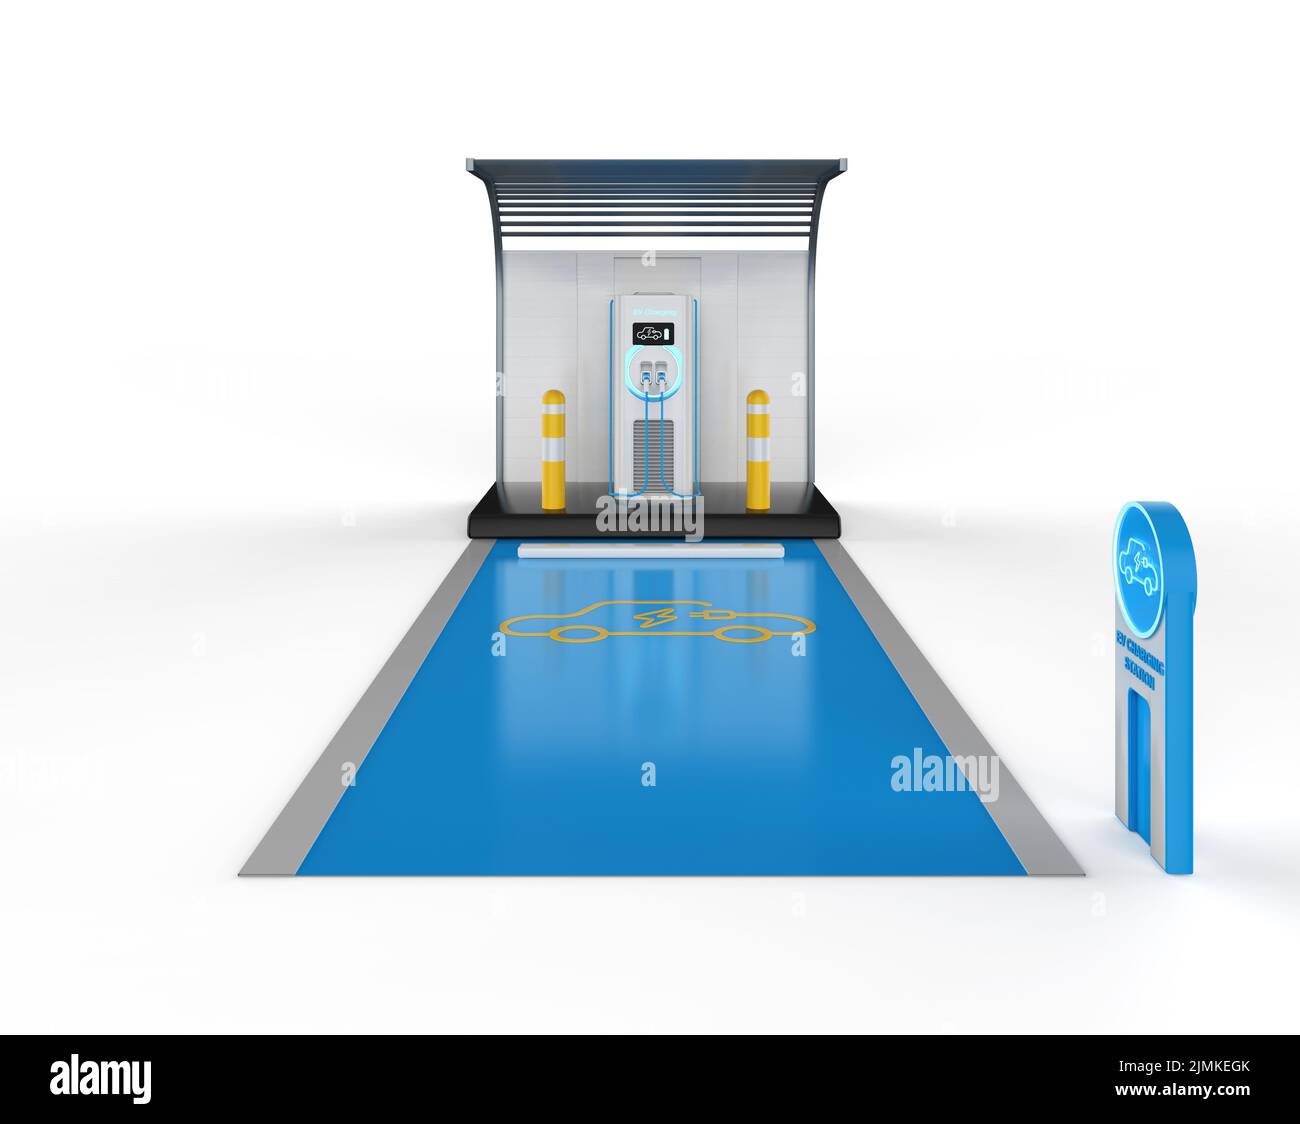 3d rendering EV charging station or electric vehicle recharging station with parking lot Stock Photo